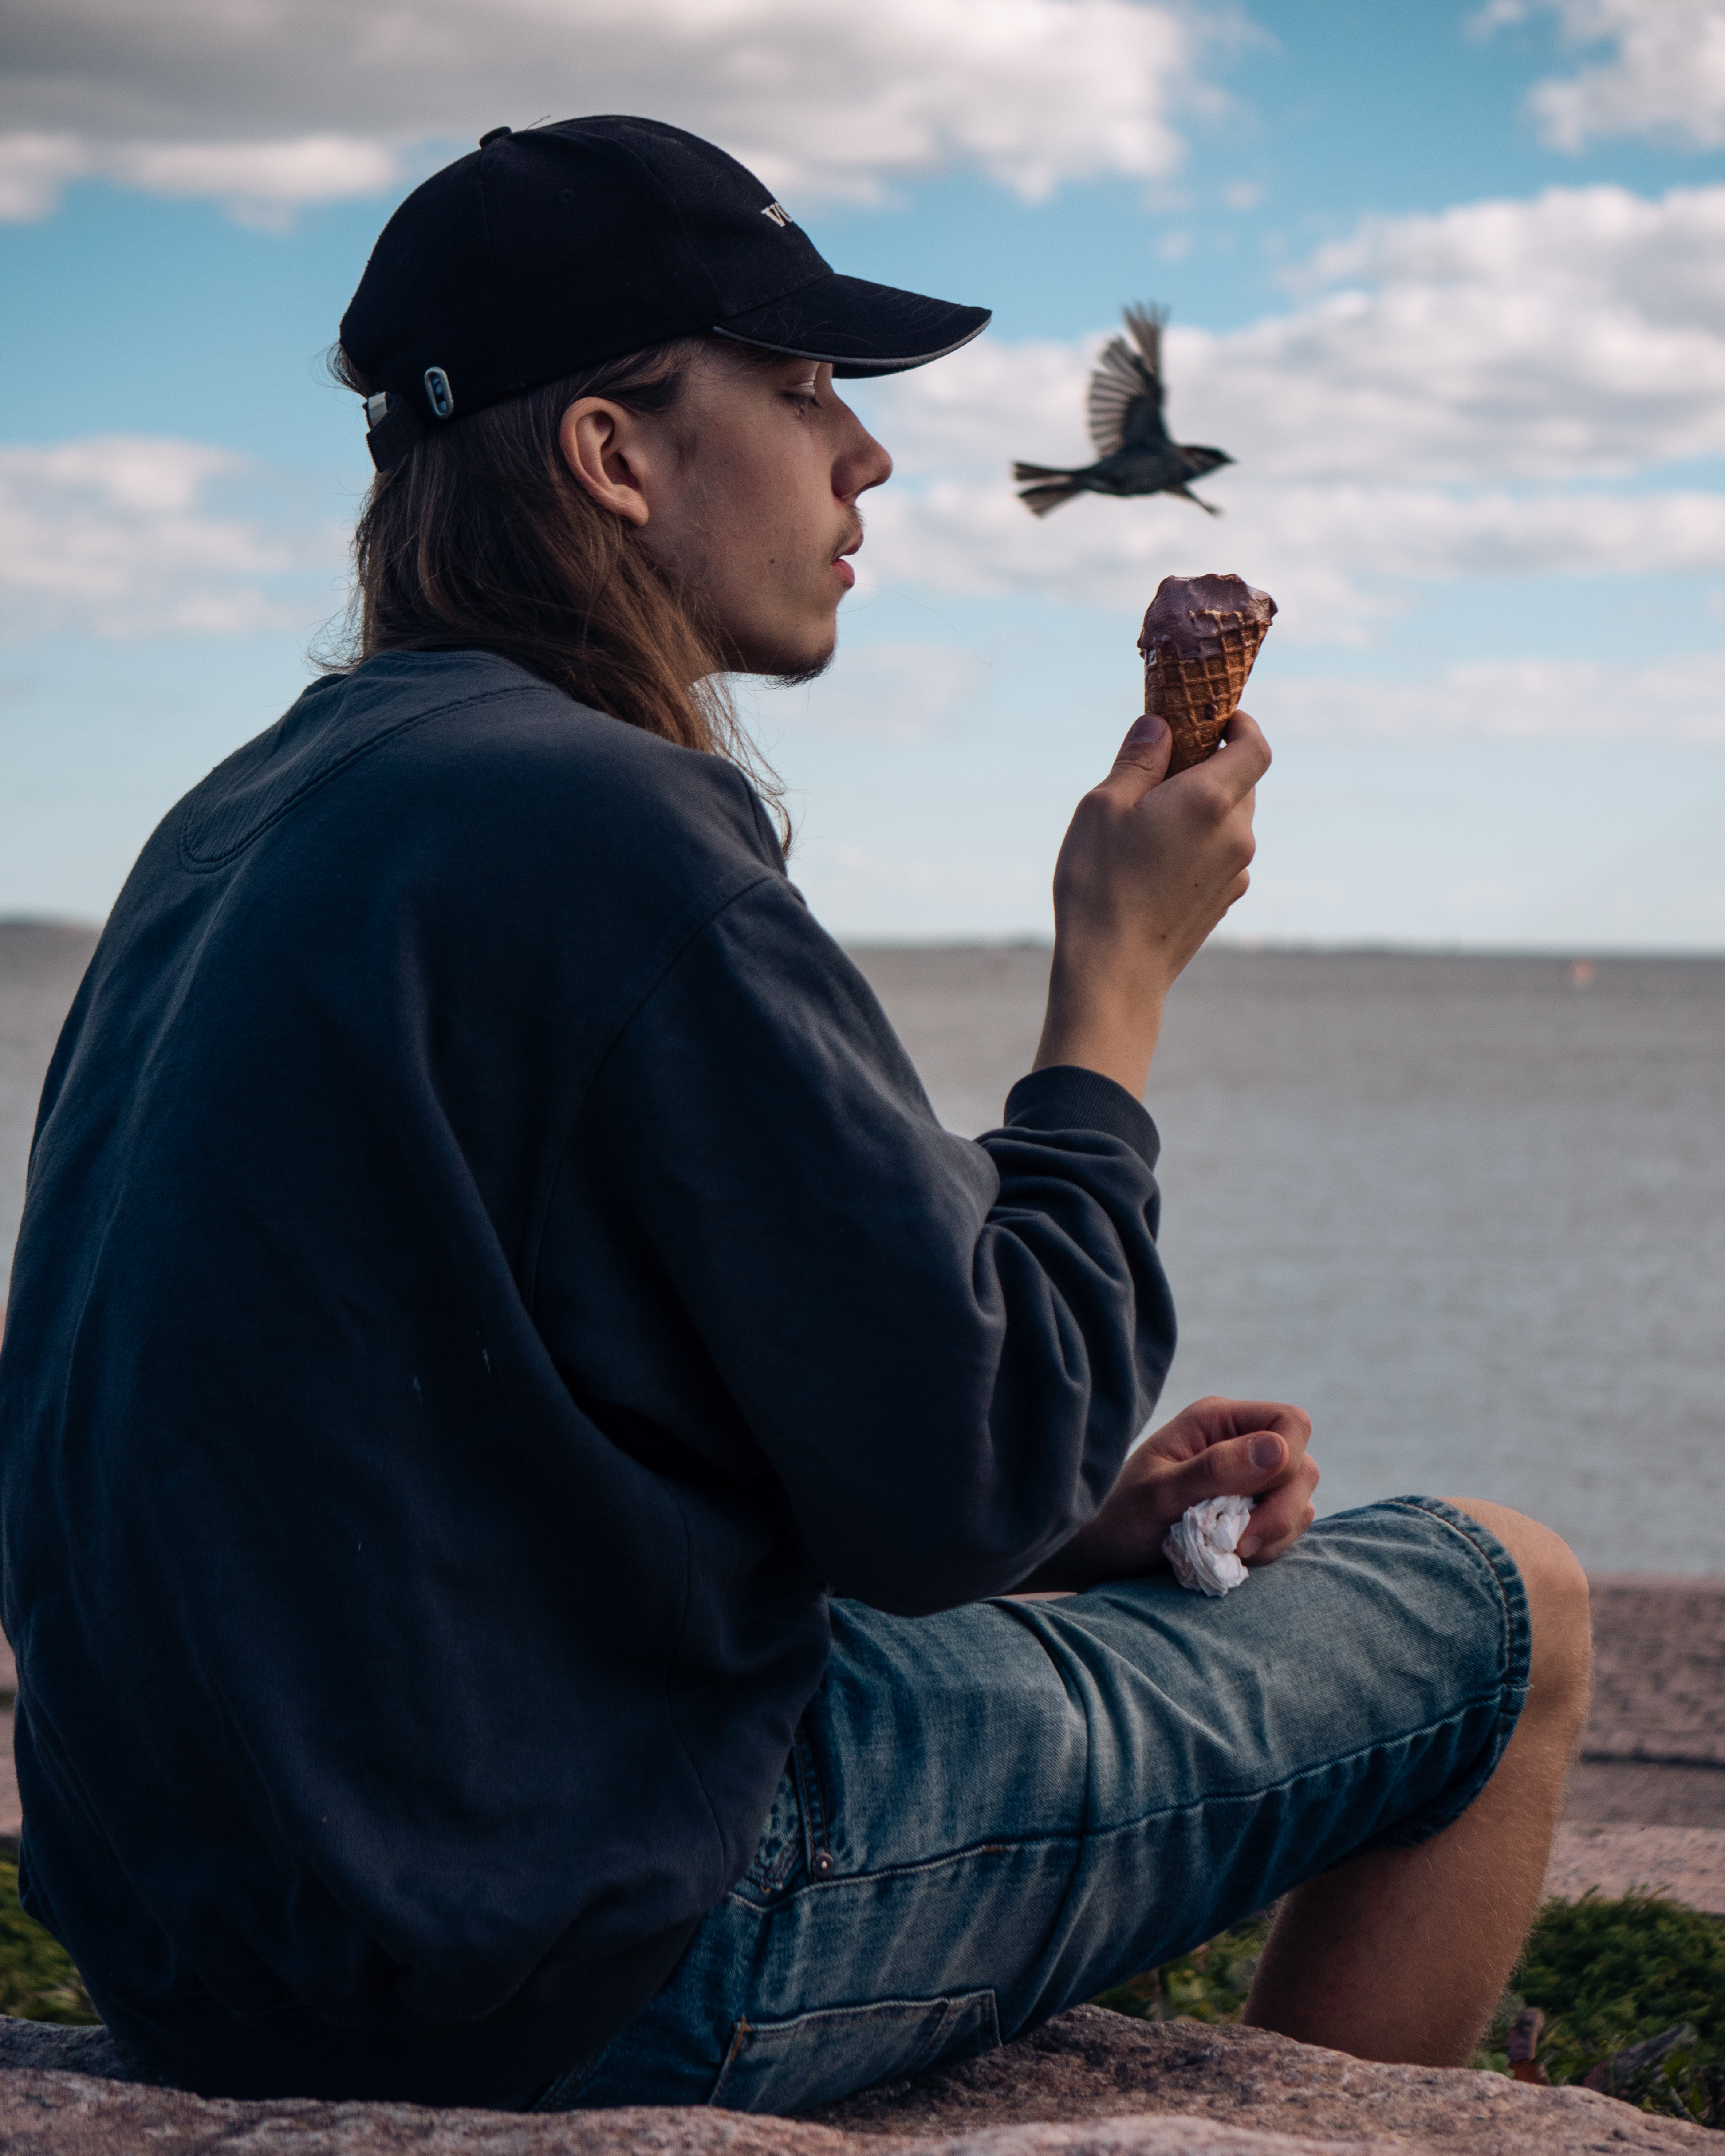 Man with long hair eating ice cream outside by the sea. A bird is flying by. He is wearing pullover and jeans.